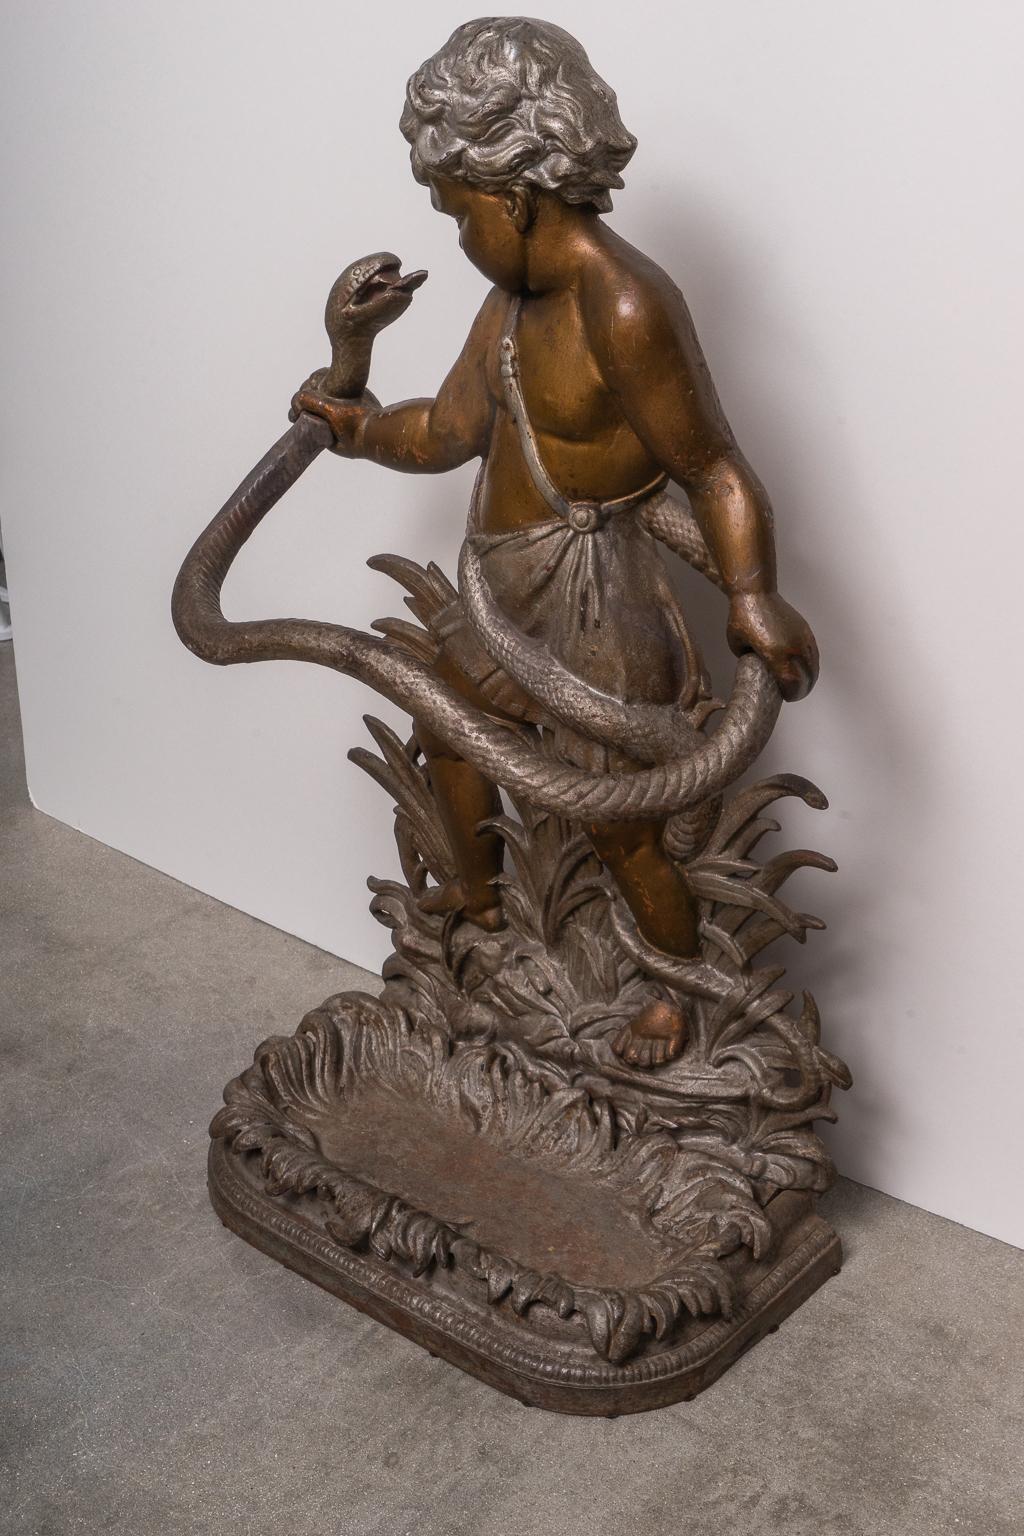 This stylish and substantial cast iron umbrella stand dates to the mid-19th century and is detailed with a young Hercules battling a large snake. The piece was created by the British firm of Edwin & Theophilus Smith.